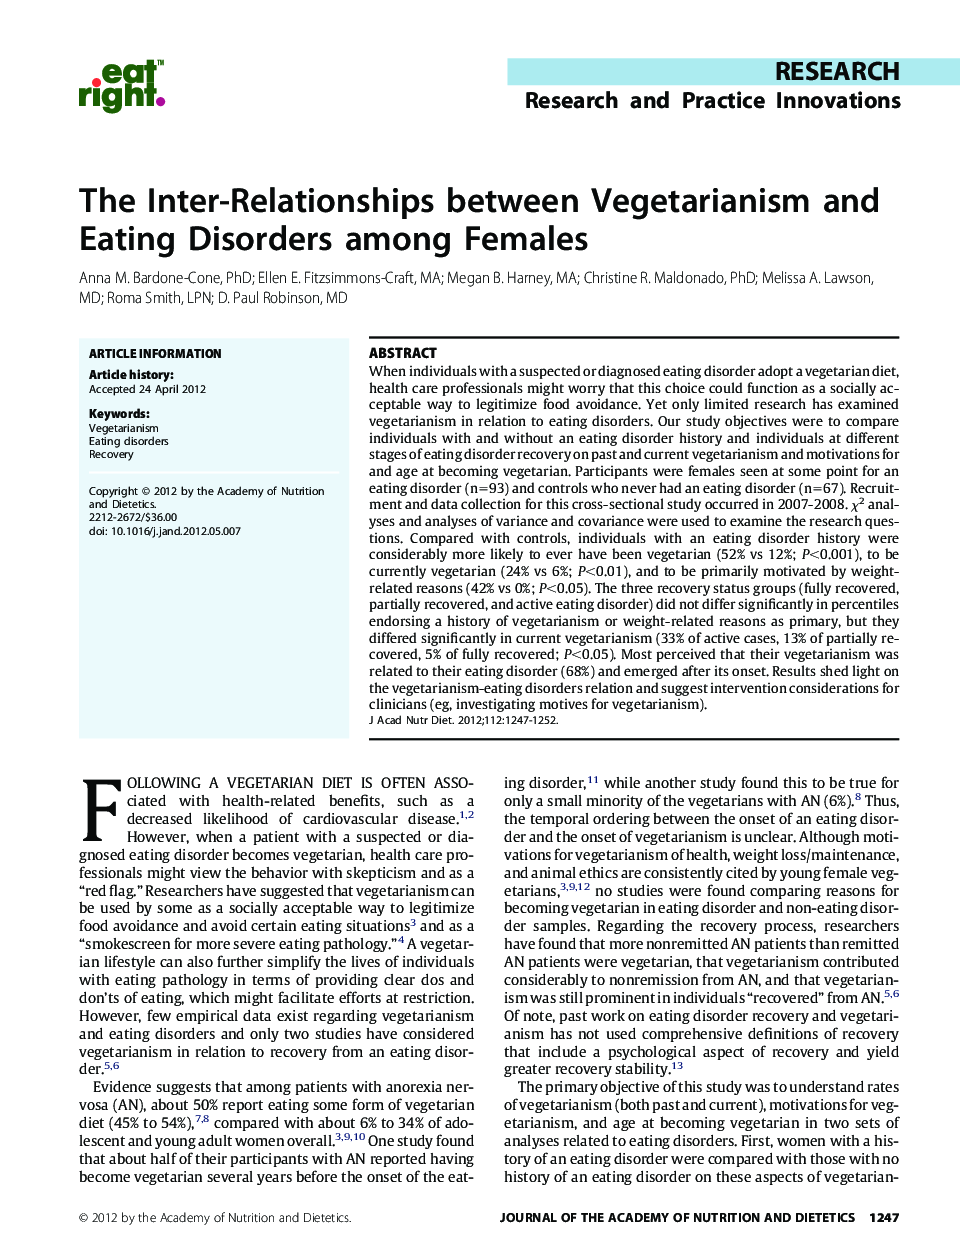 The Inter-Relationships between Vegetarianism and Eating Disorders among Females 